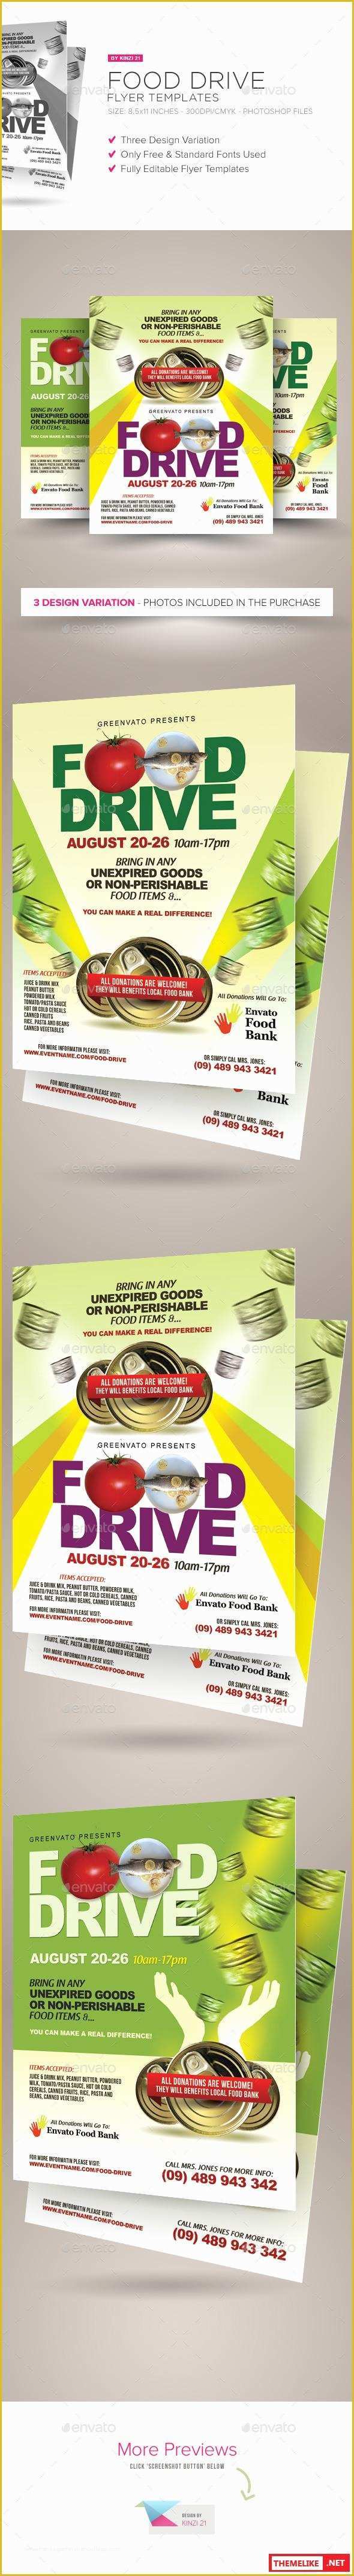 Free School Supply Drive Flyer Template Of Creativemarket School Supply Drive Flyer Templates